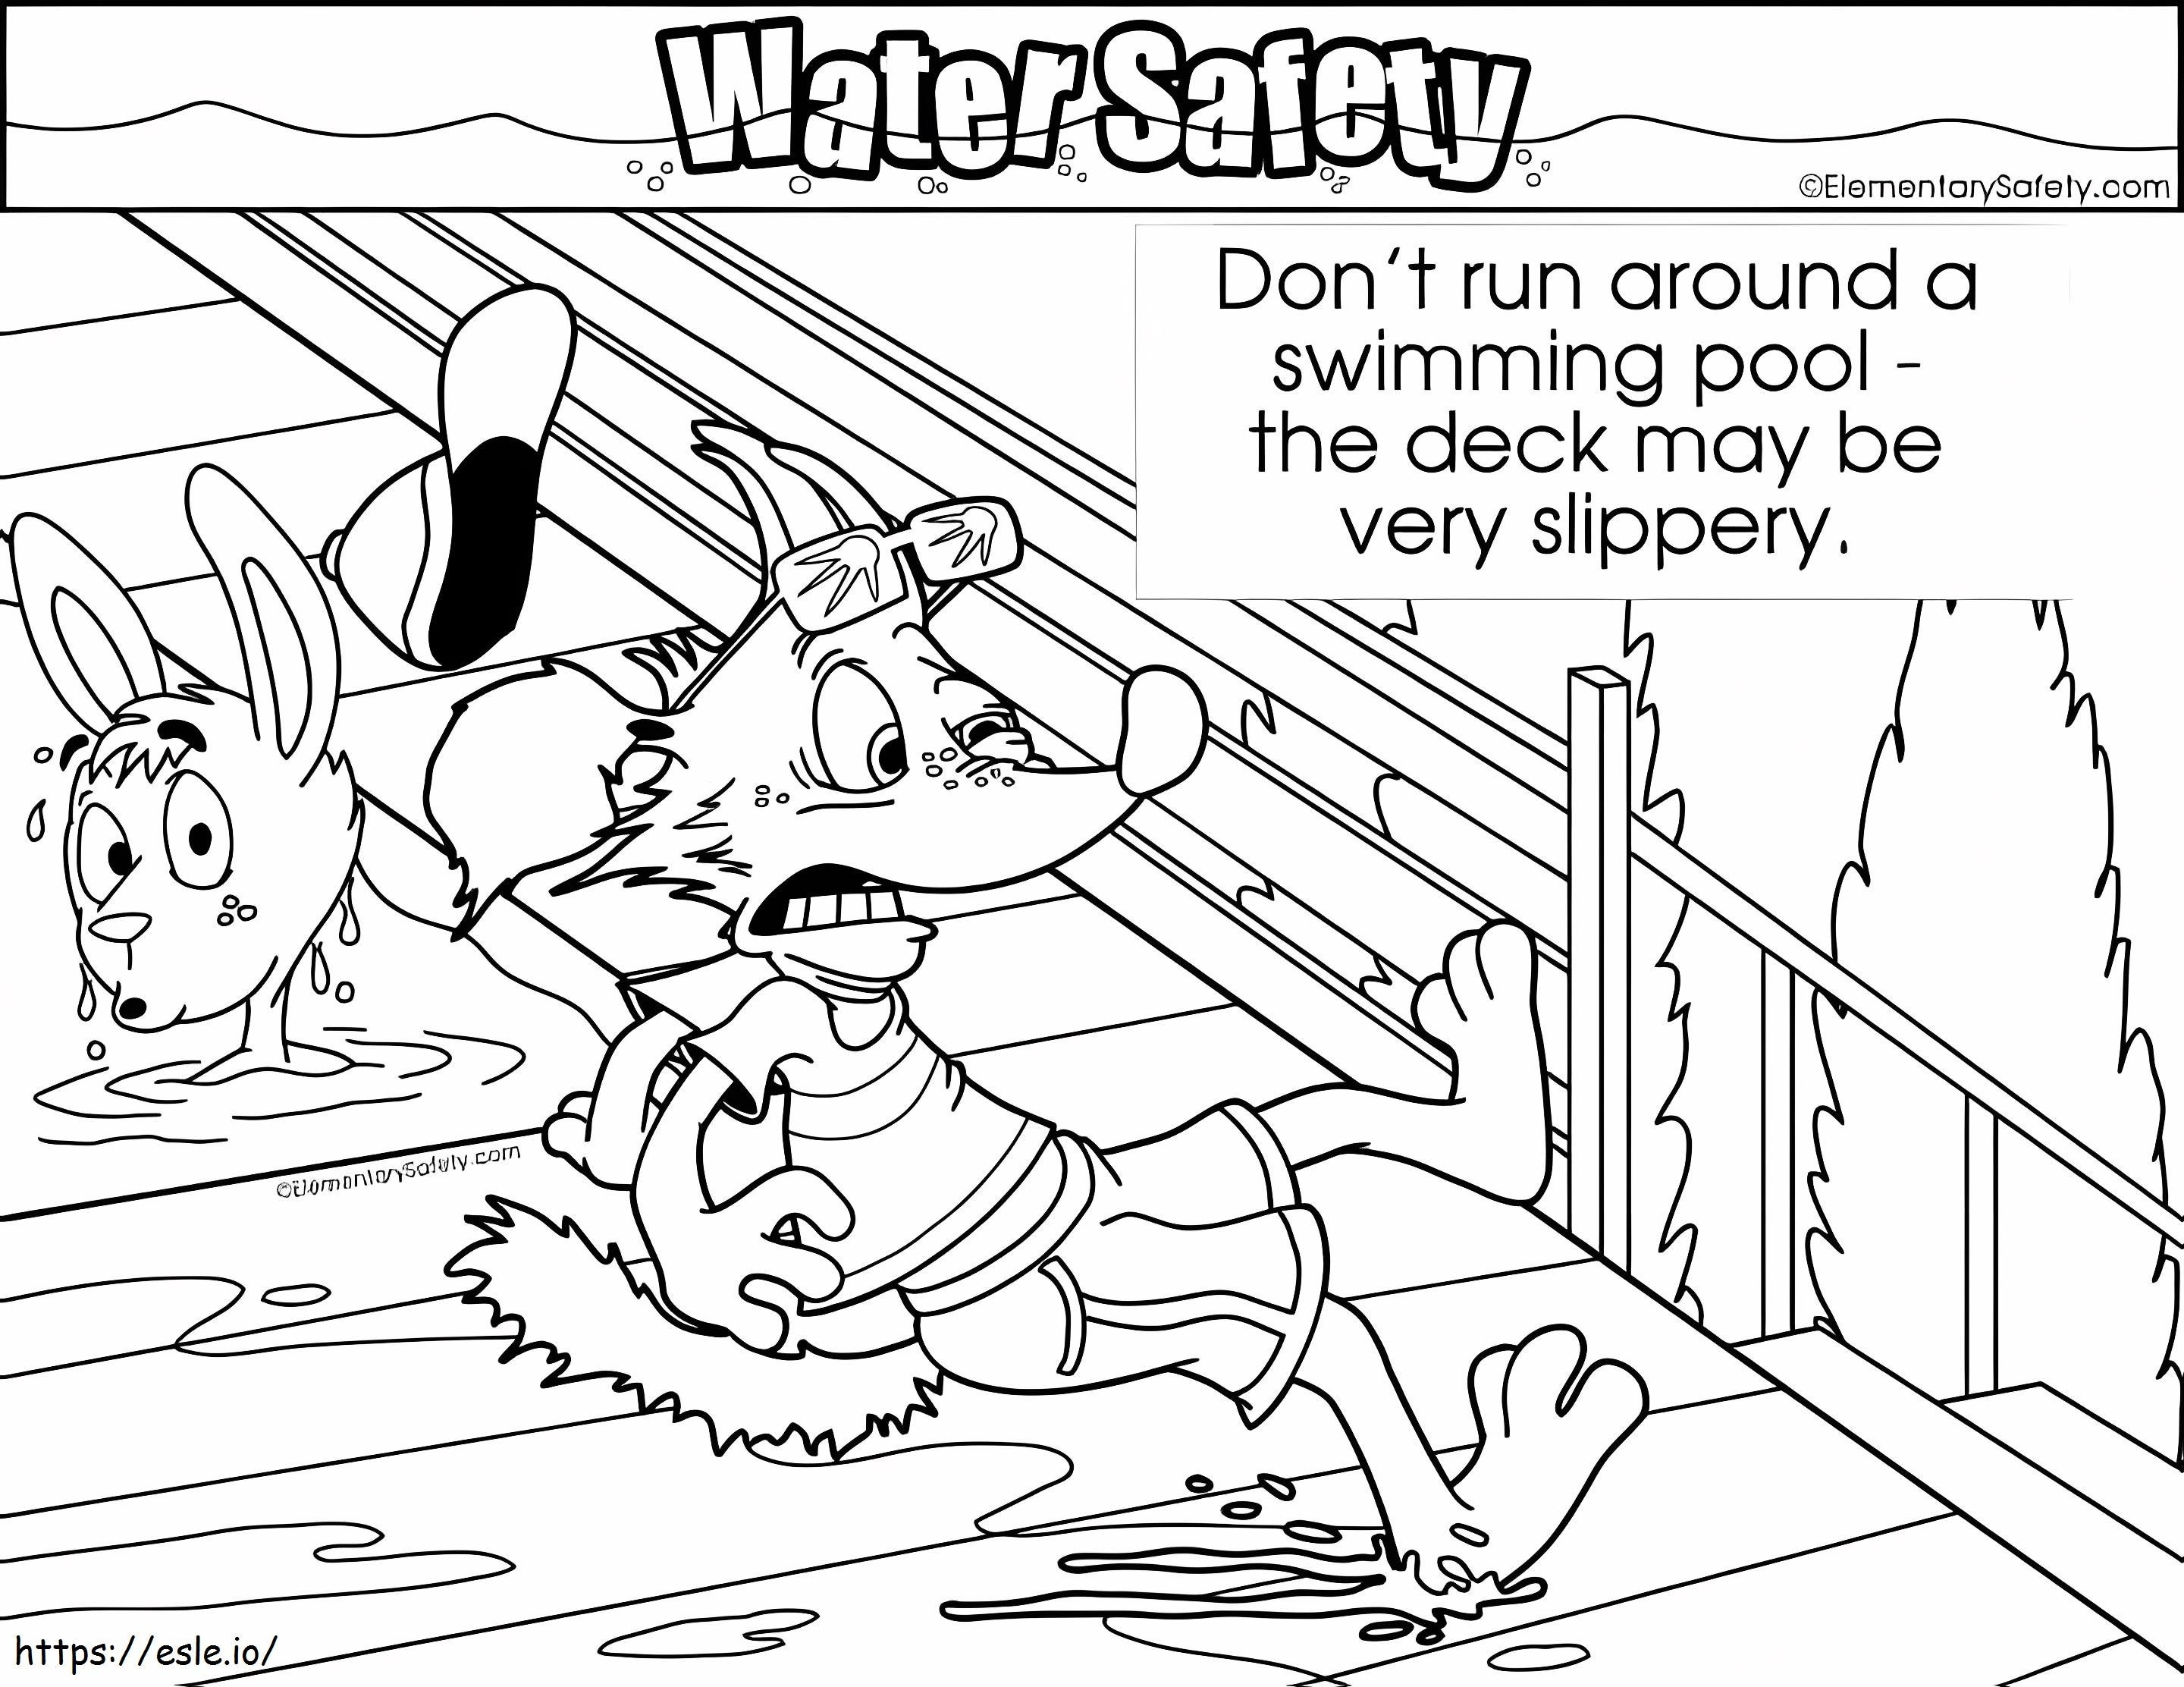 Slippery Deck Safety coloring page